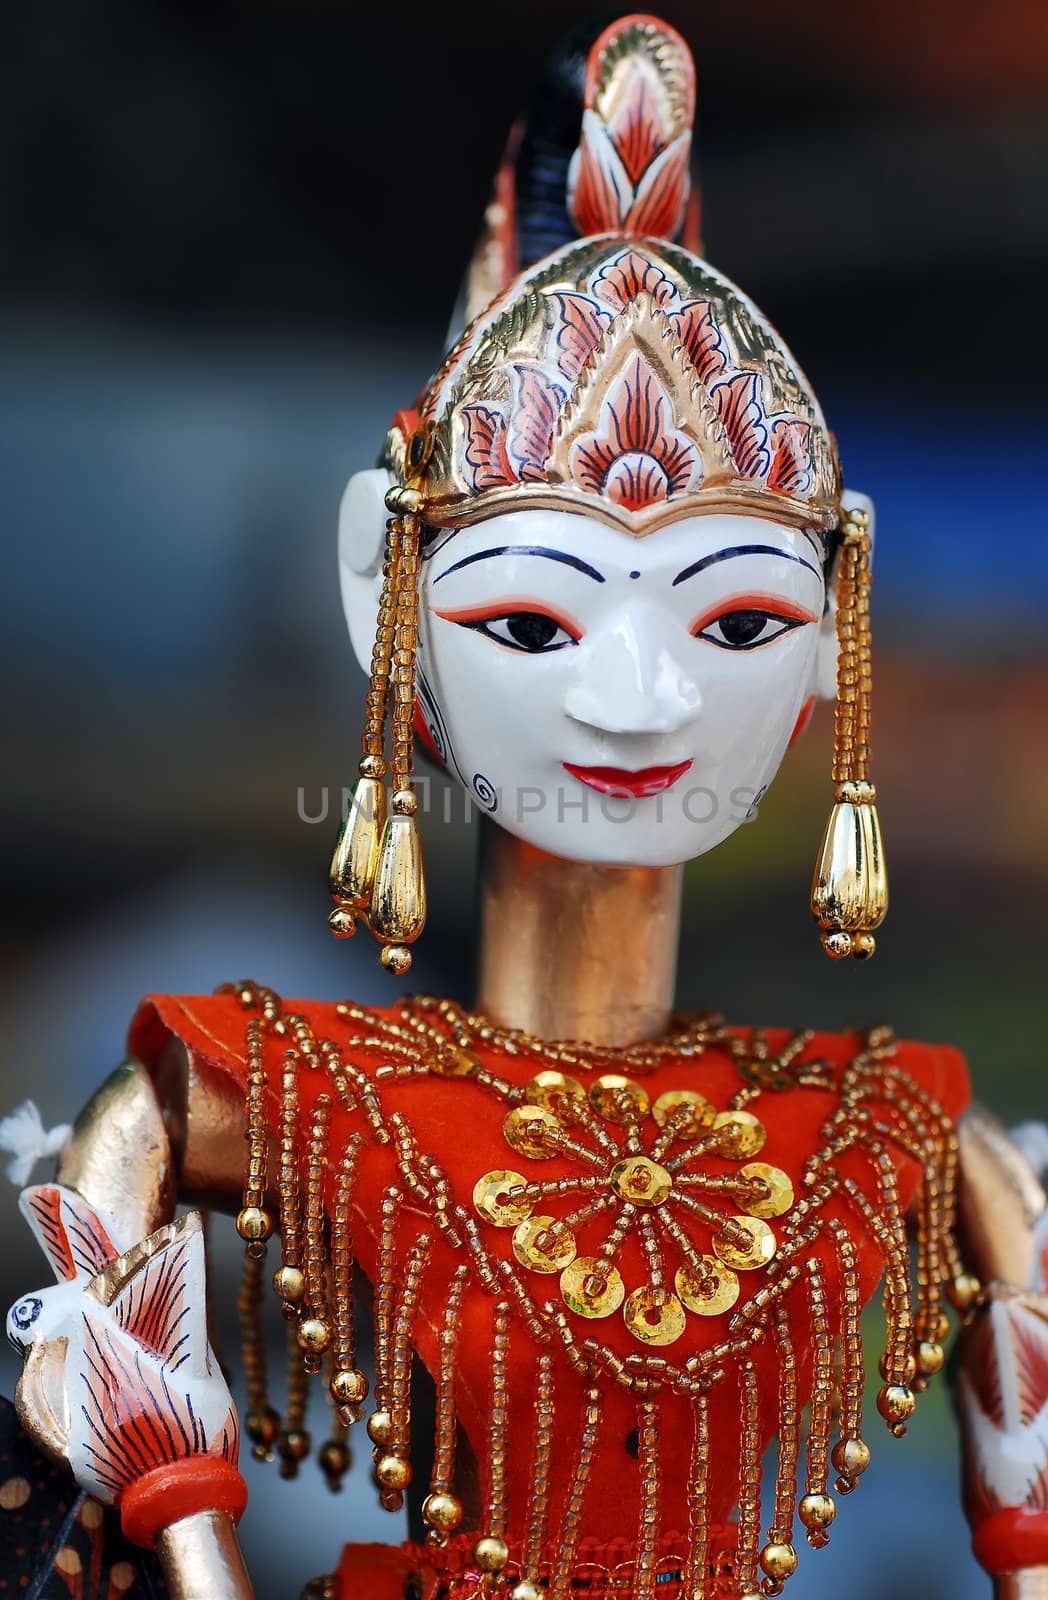 Traditional doll toy from India